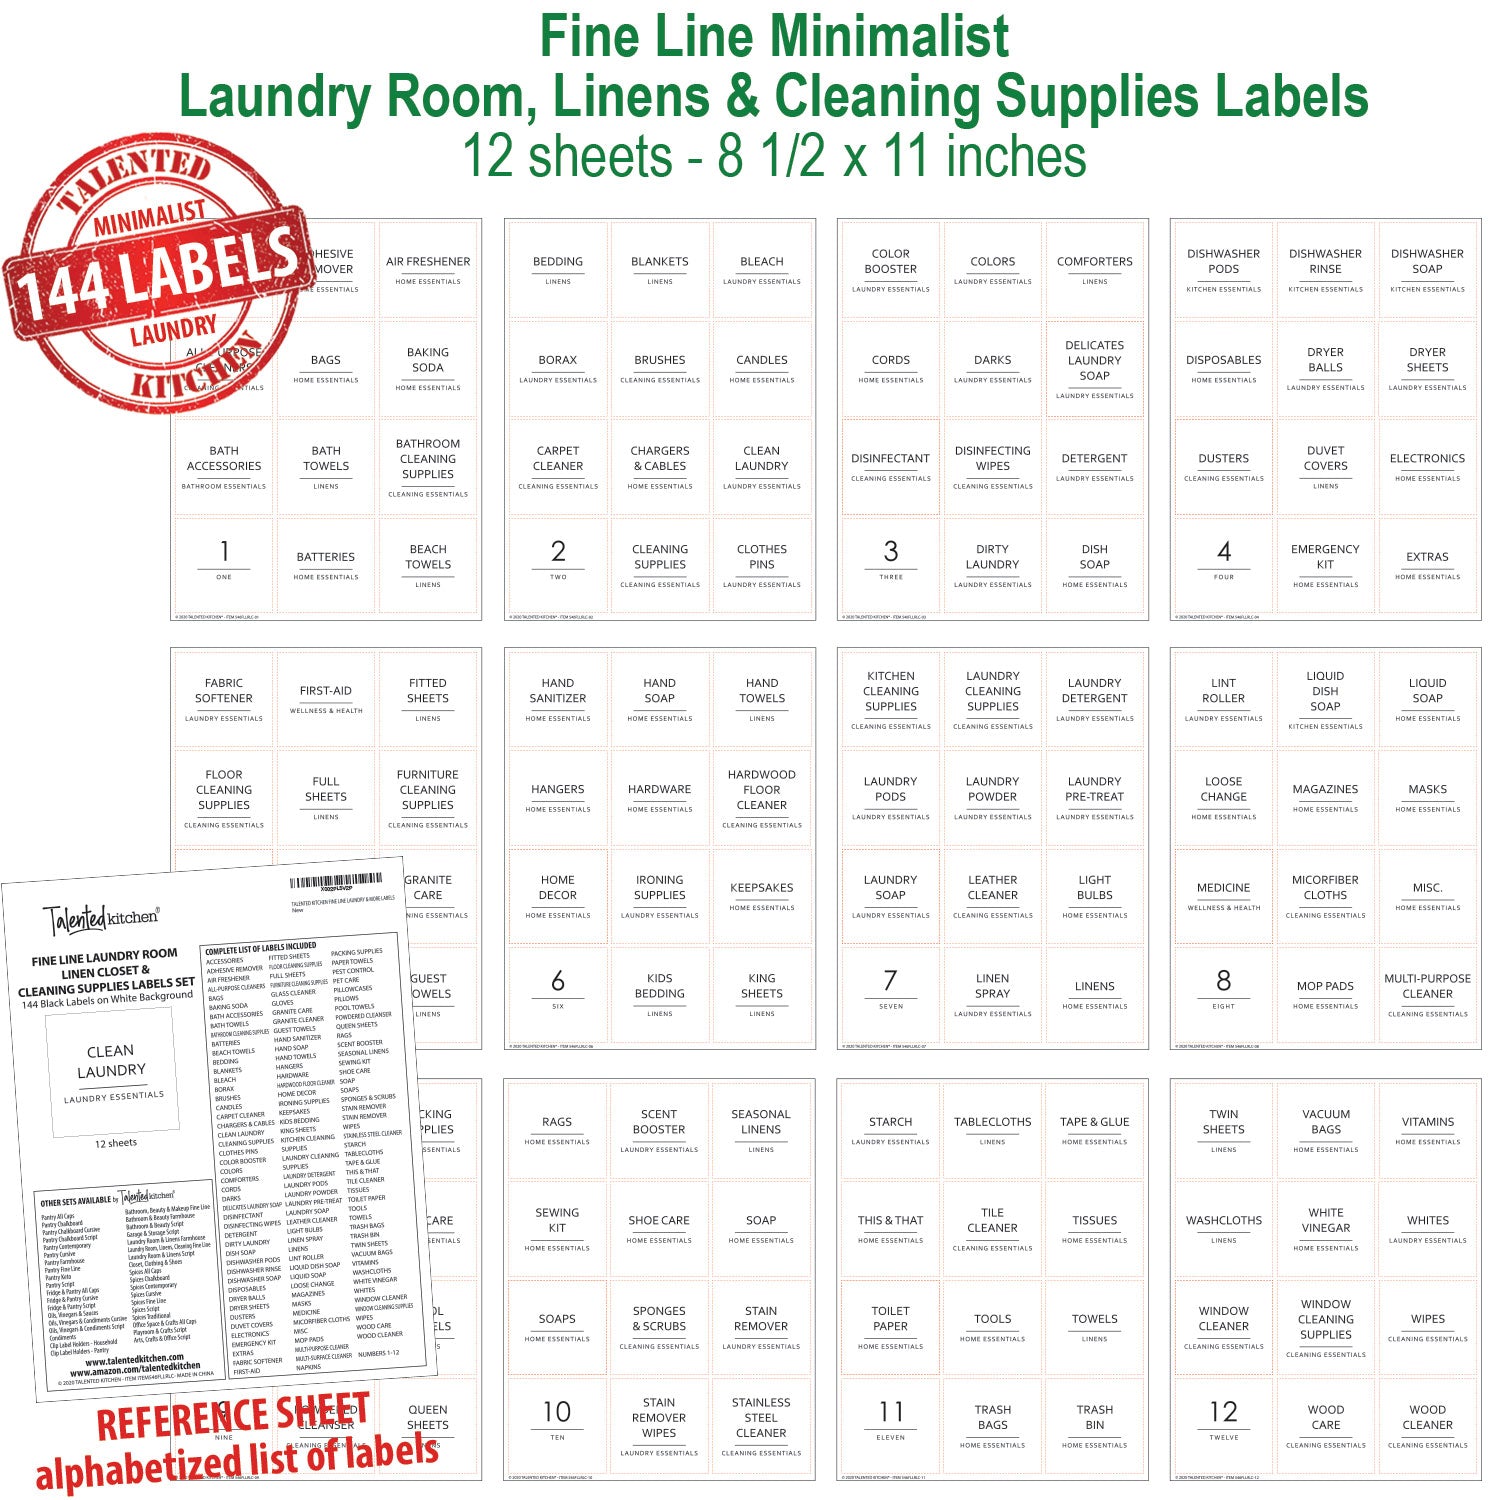 159 Minimalist Home Laundry Labels for Organizing - Linen Storage Labels, Laundry Room Labels, Cleaning Labels - Preprinted Organization Labels for